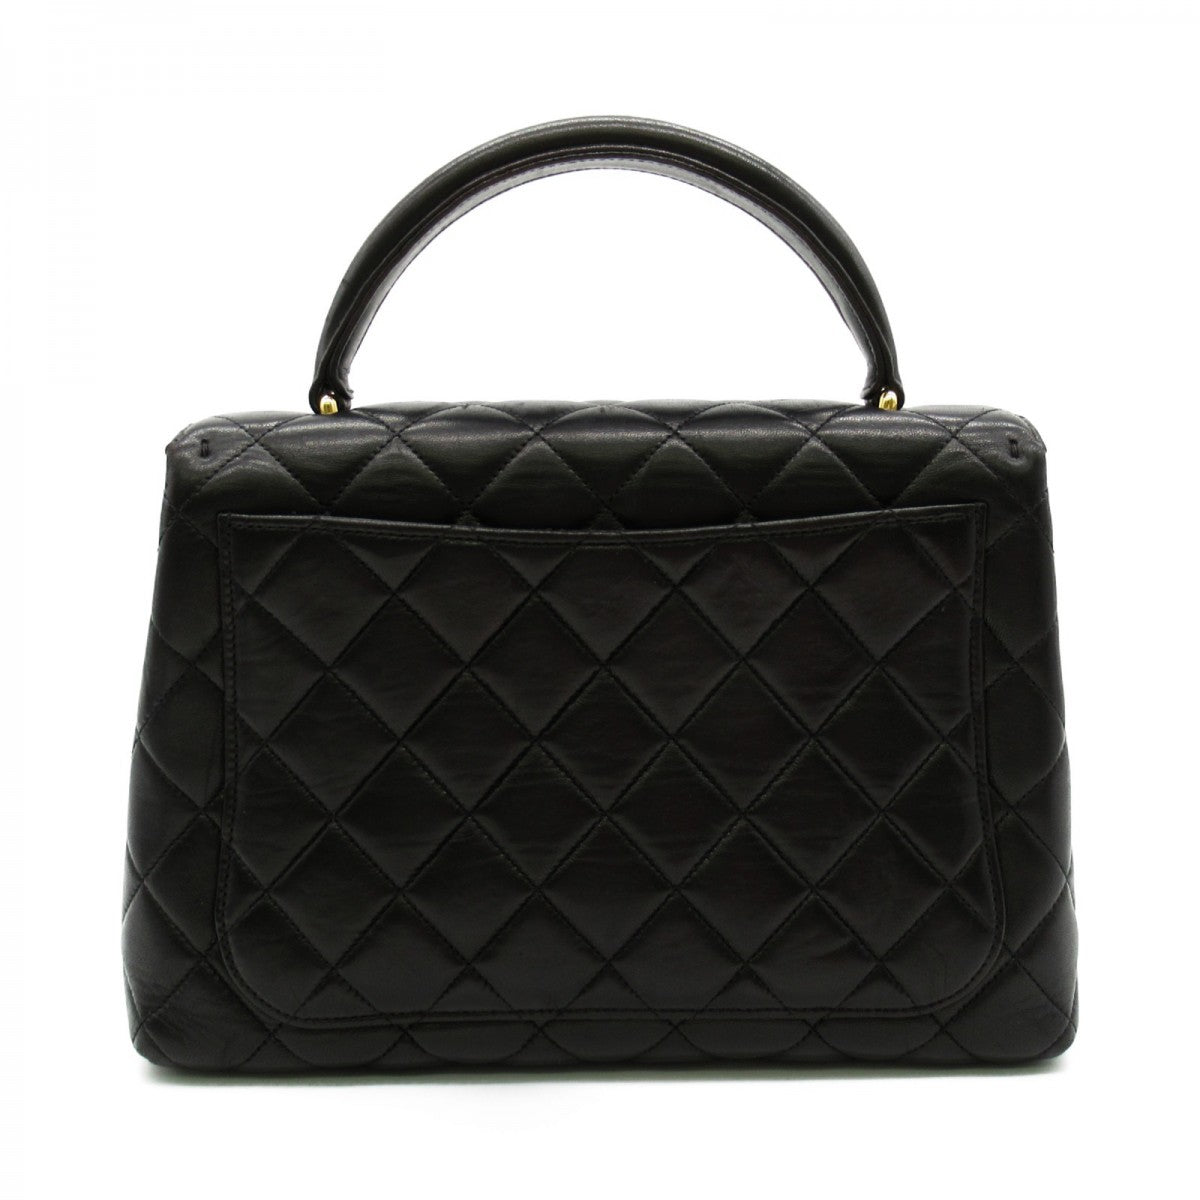 CC Quilted Leather Kelly Handbag